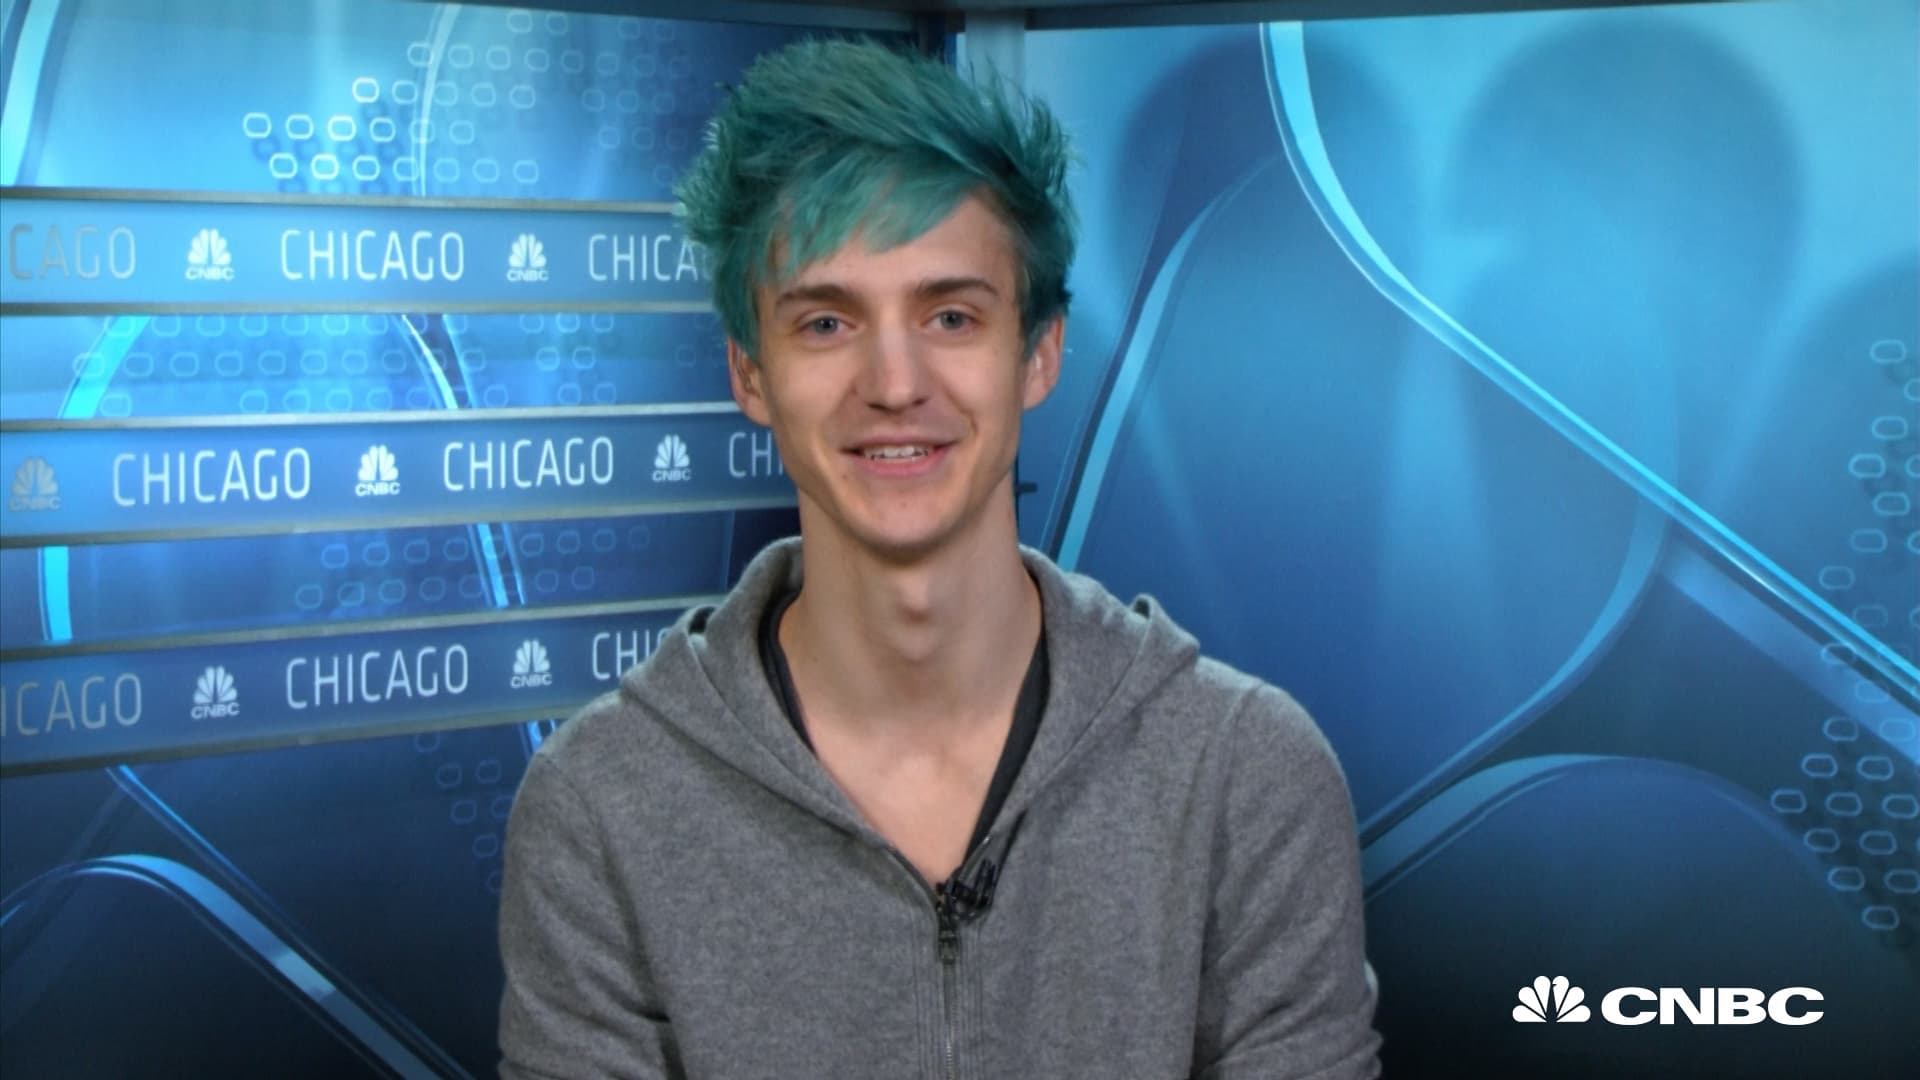 Fortnite star Tyler Ninja moves Twitch to Mixer